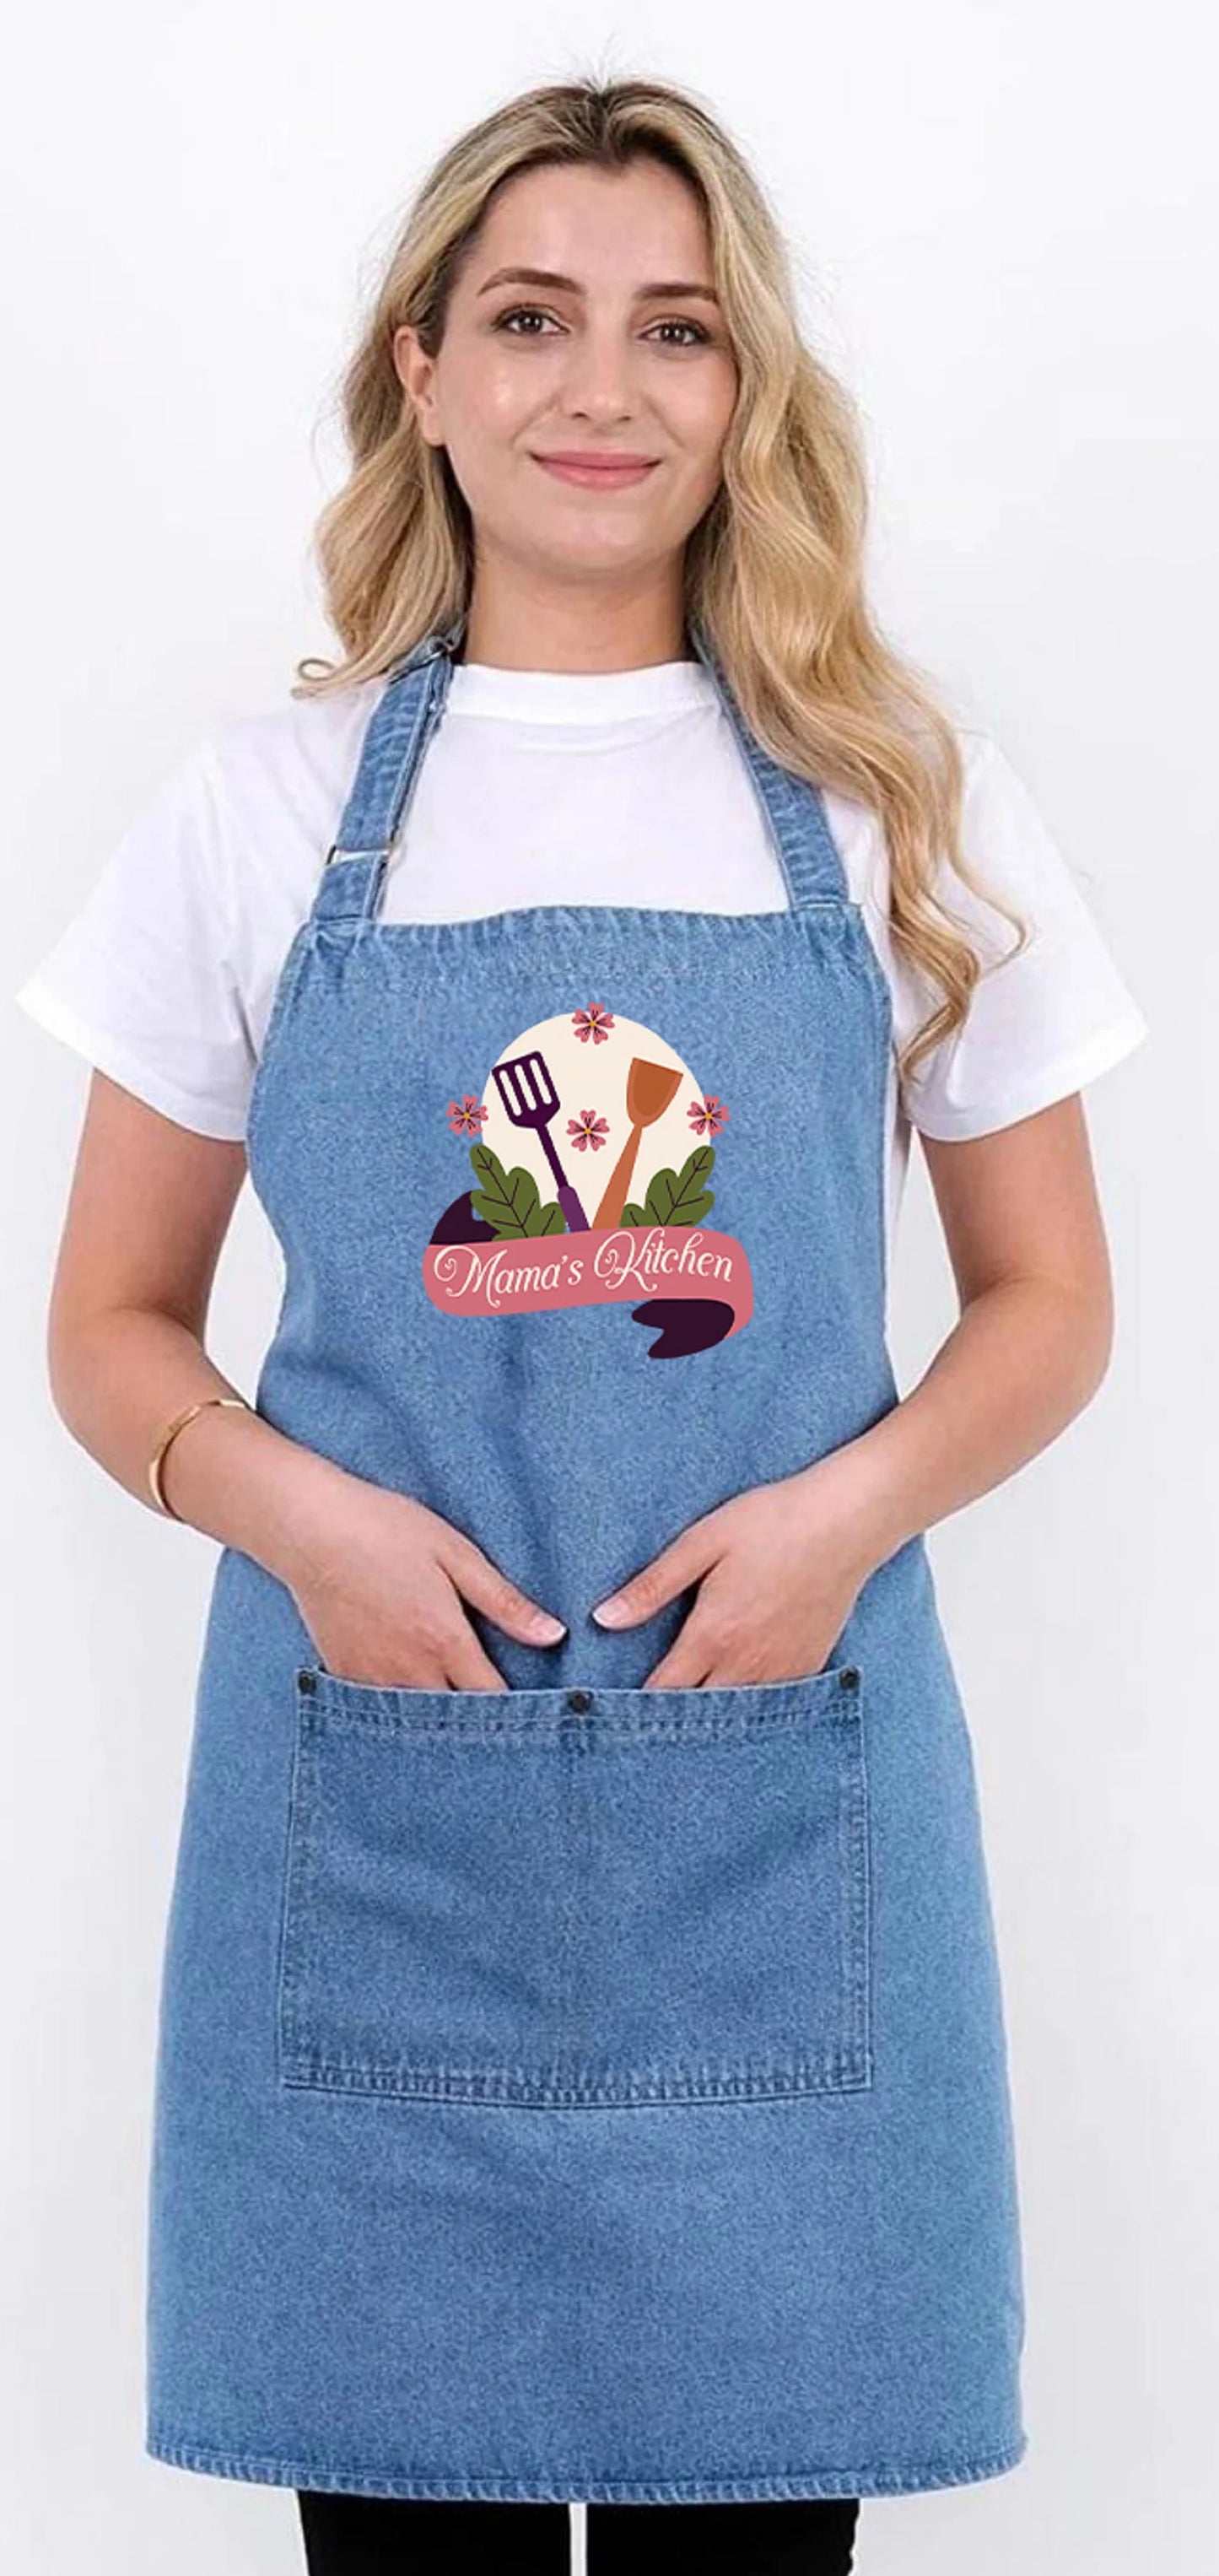 Mama's Kitchen Apron: Perfect Denim Gift for Grandma and Mom's Birthday - Customized Cooking Apron with Pockets for Women!